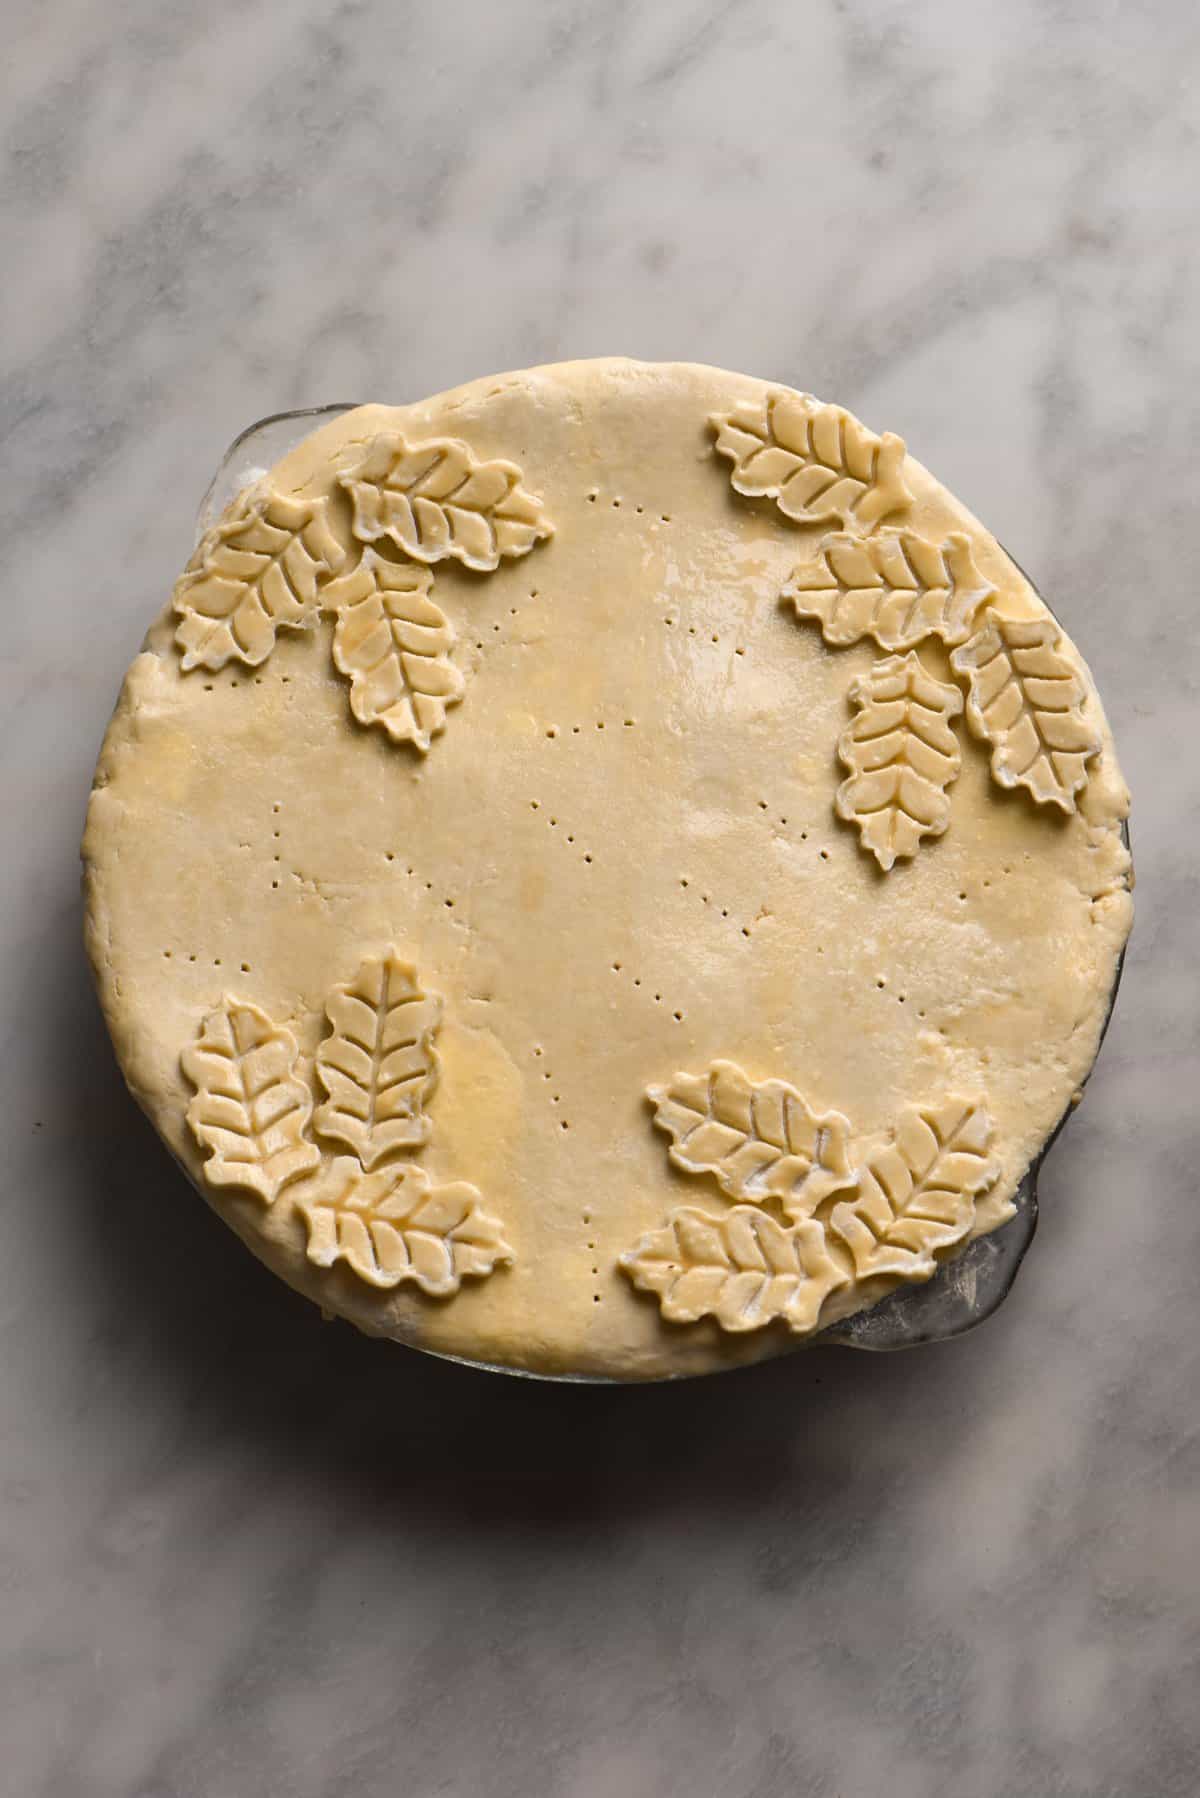 A gluten free greens pie topped with ornamental pastry leaves before baking